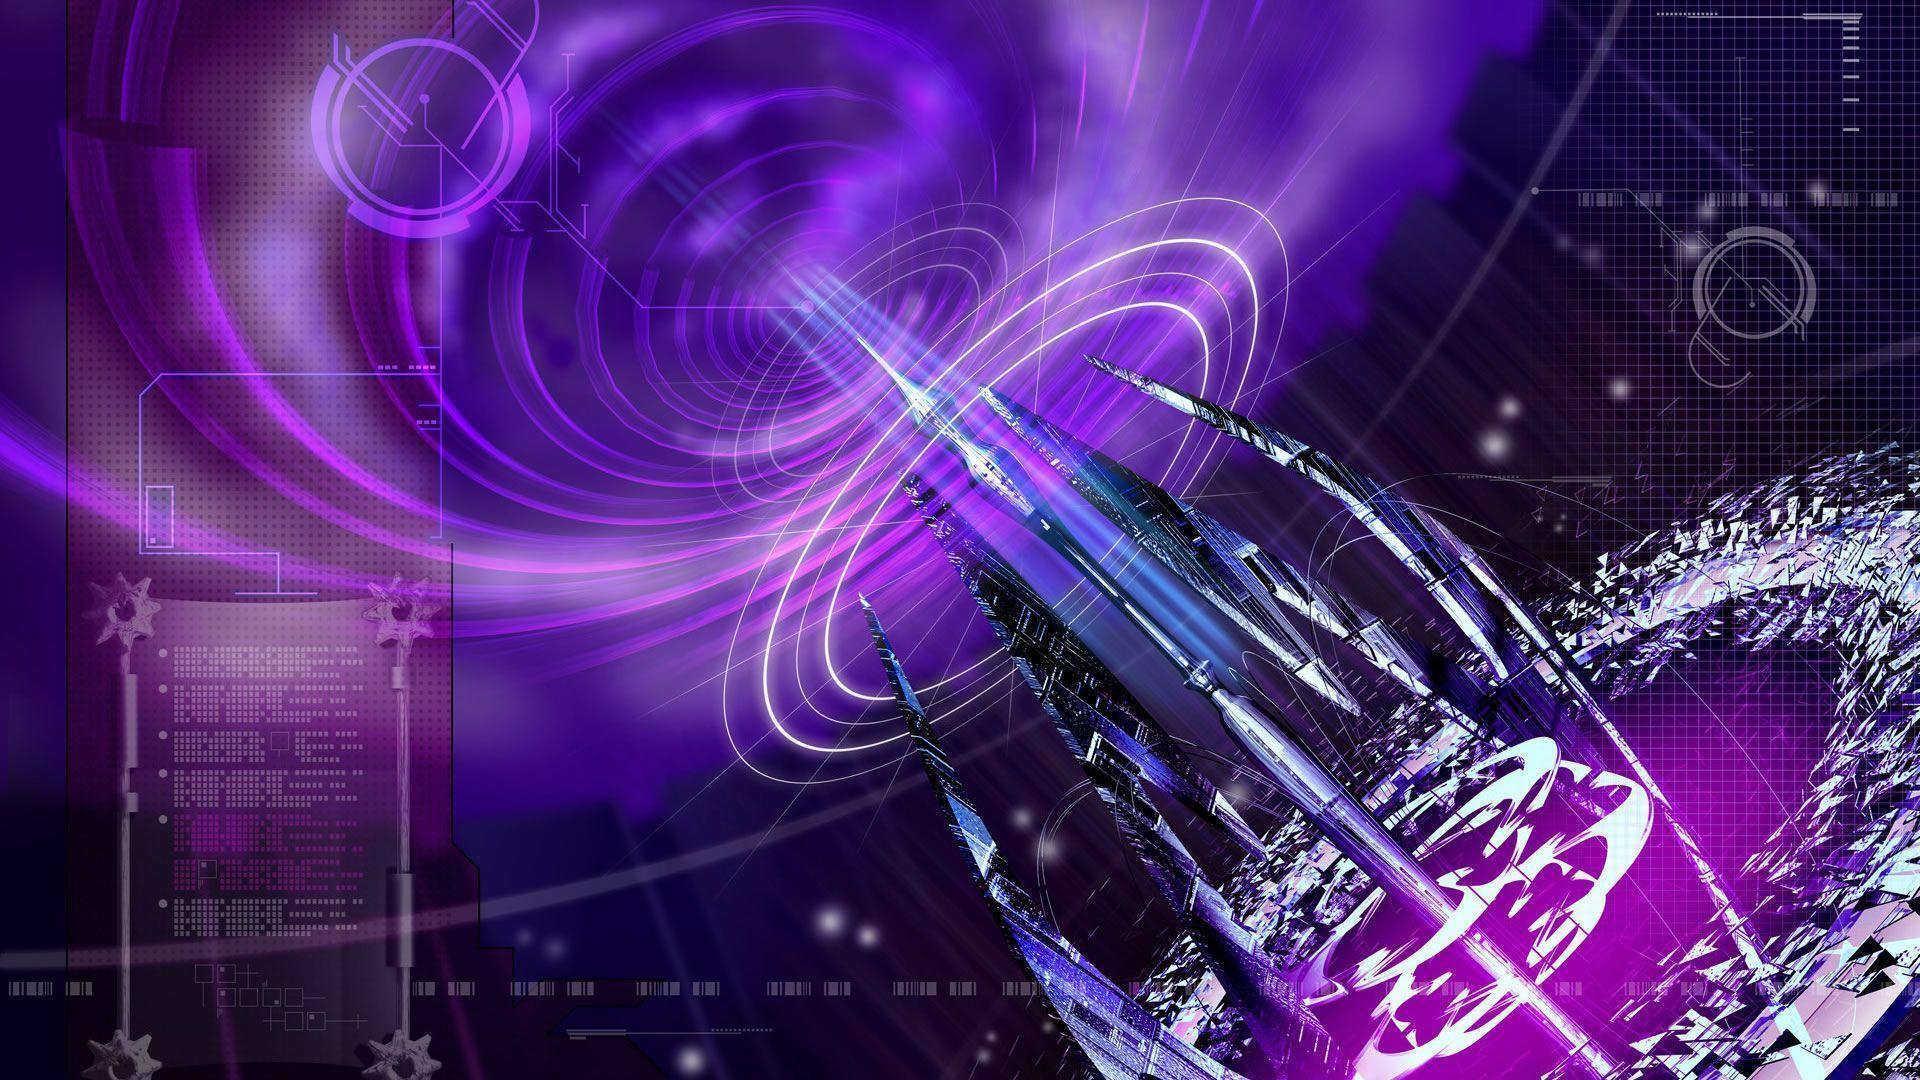 Wallpaper For > Awesome Purple Abstract Background